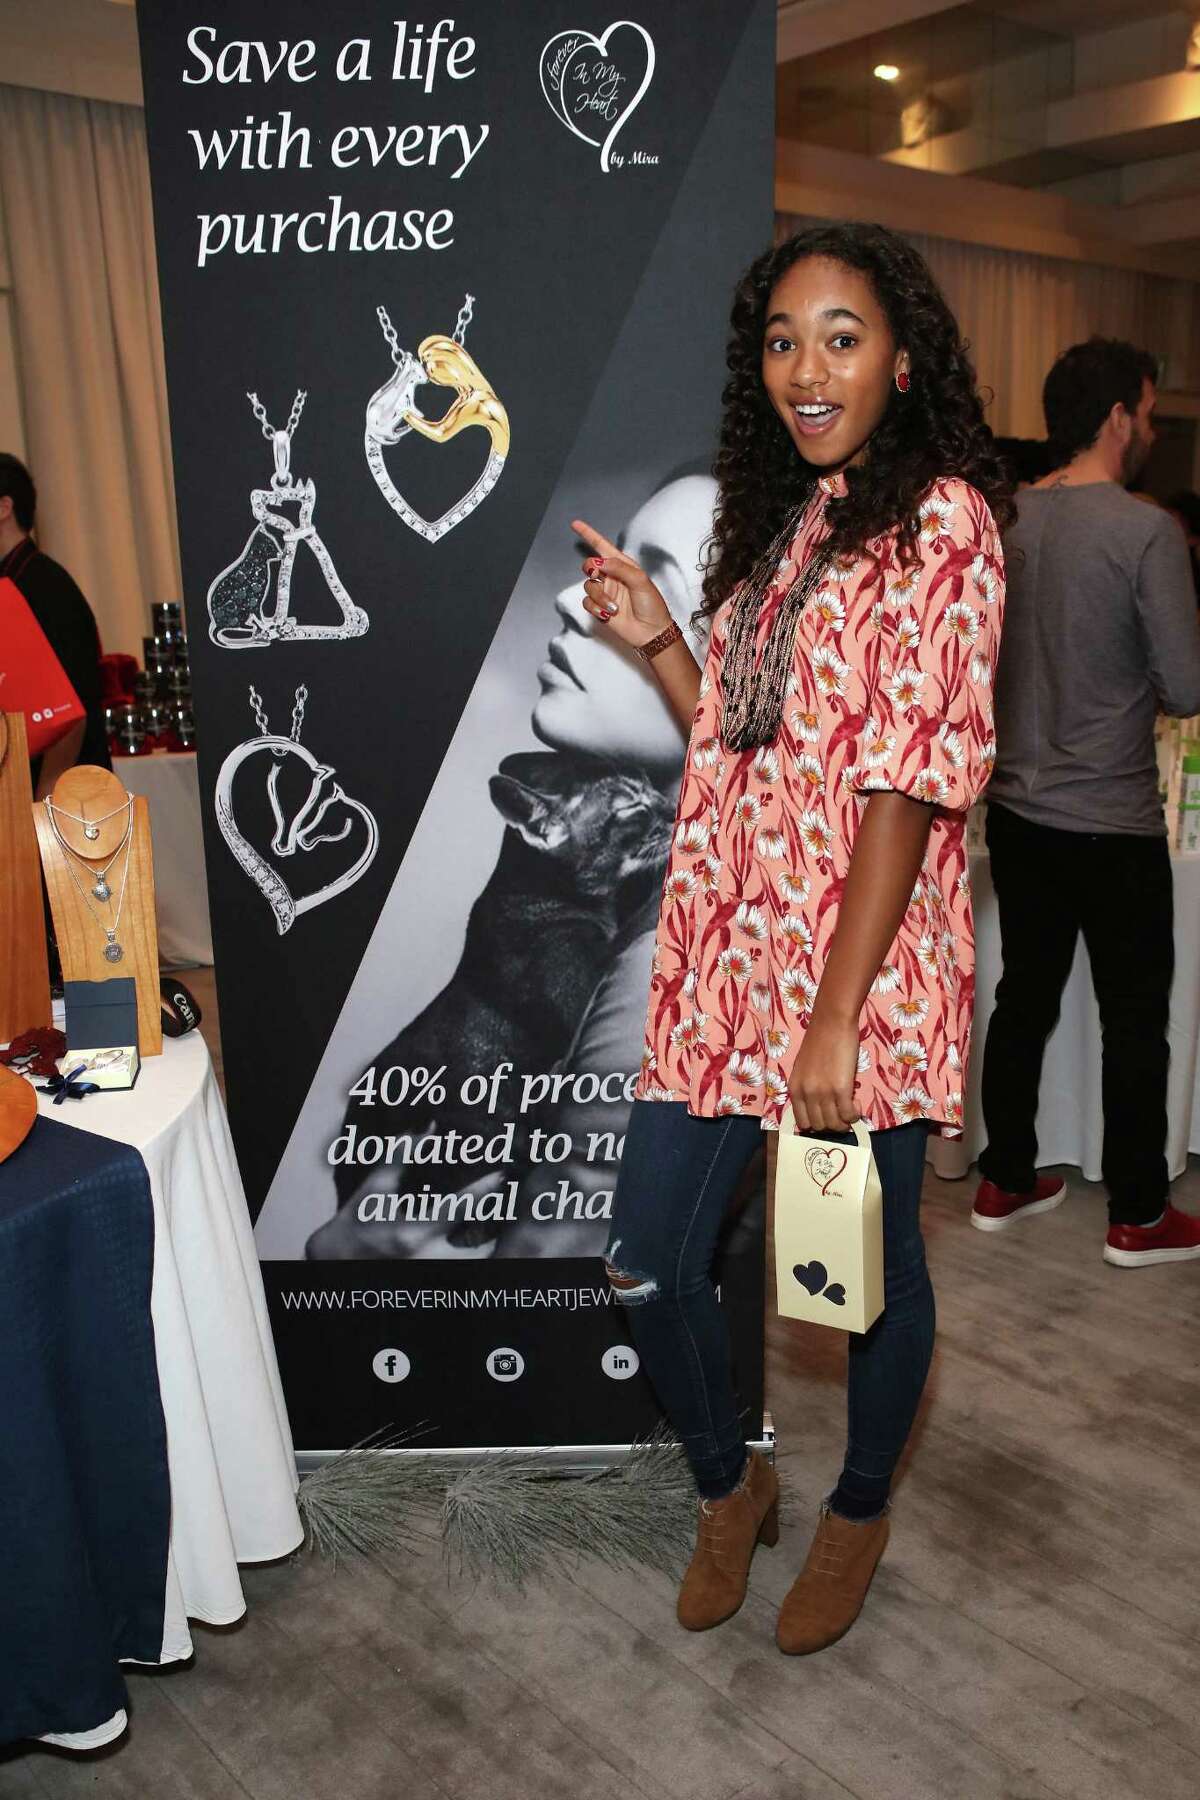 Celebrity Gifting Suite in Honor of The 2017 Golden Globe Awards presented by Secret Room Events held at SLS Hotel on January 16, 2017 in Beverly Hills, California (Photo by Fanny Garcia)